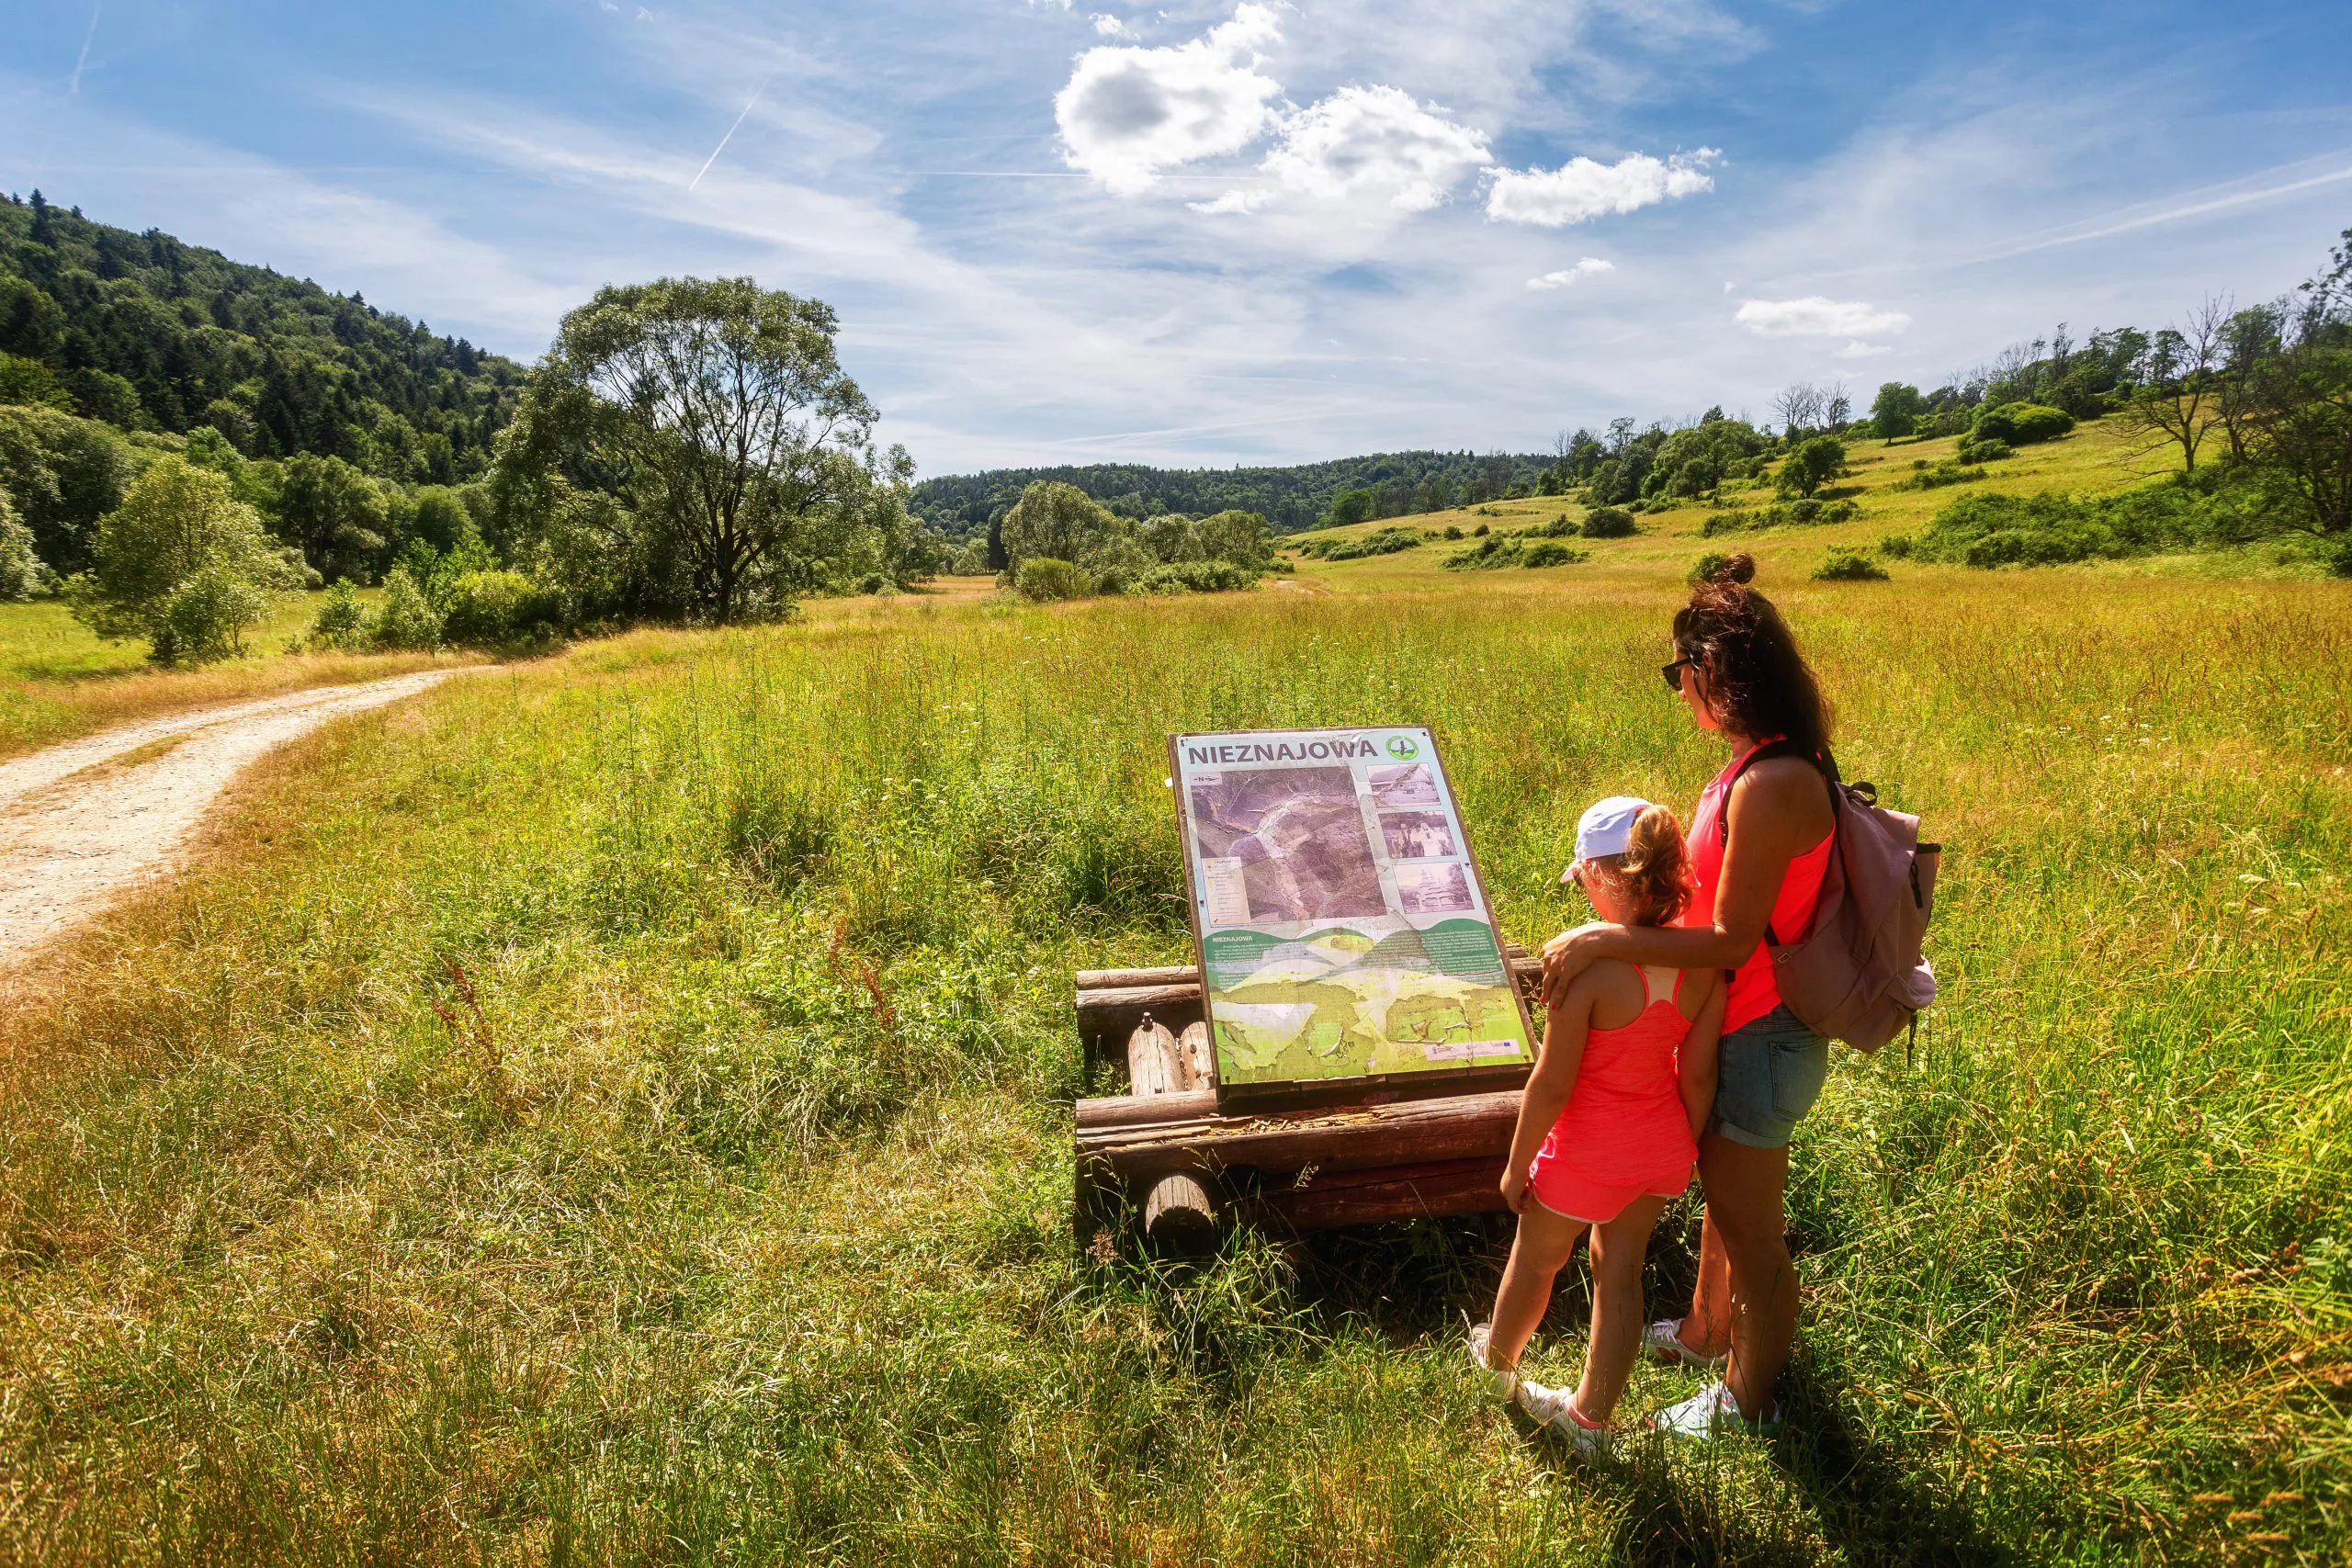 Young woman and little girl on a summer trail read information on a board mounted in a meadow, the dirt road on the left runs towards clusters of trees and hills on the horizon under cloudy blue skies.